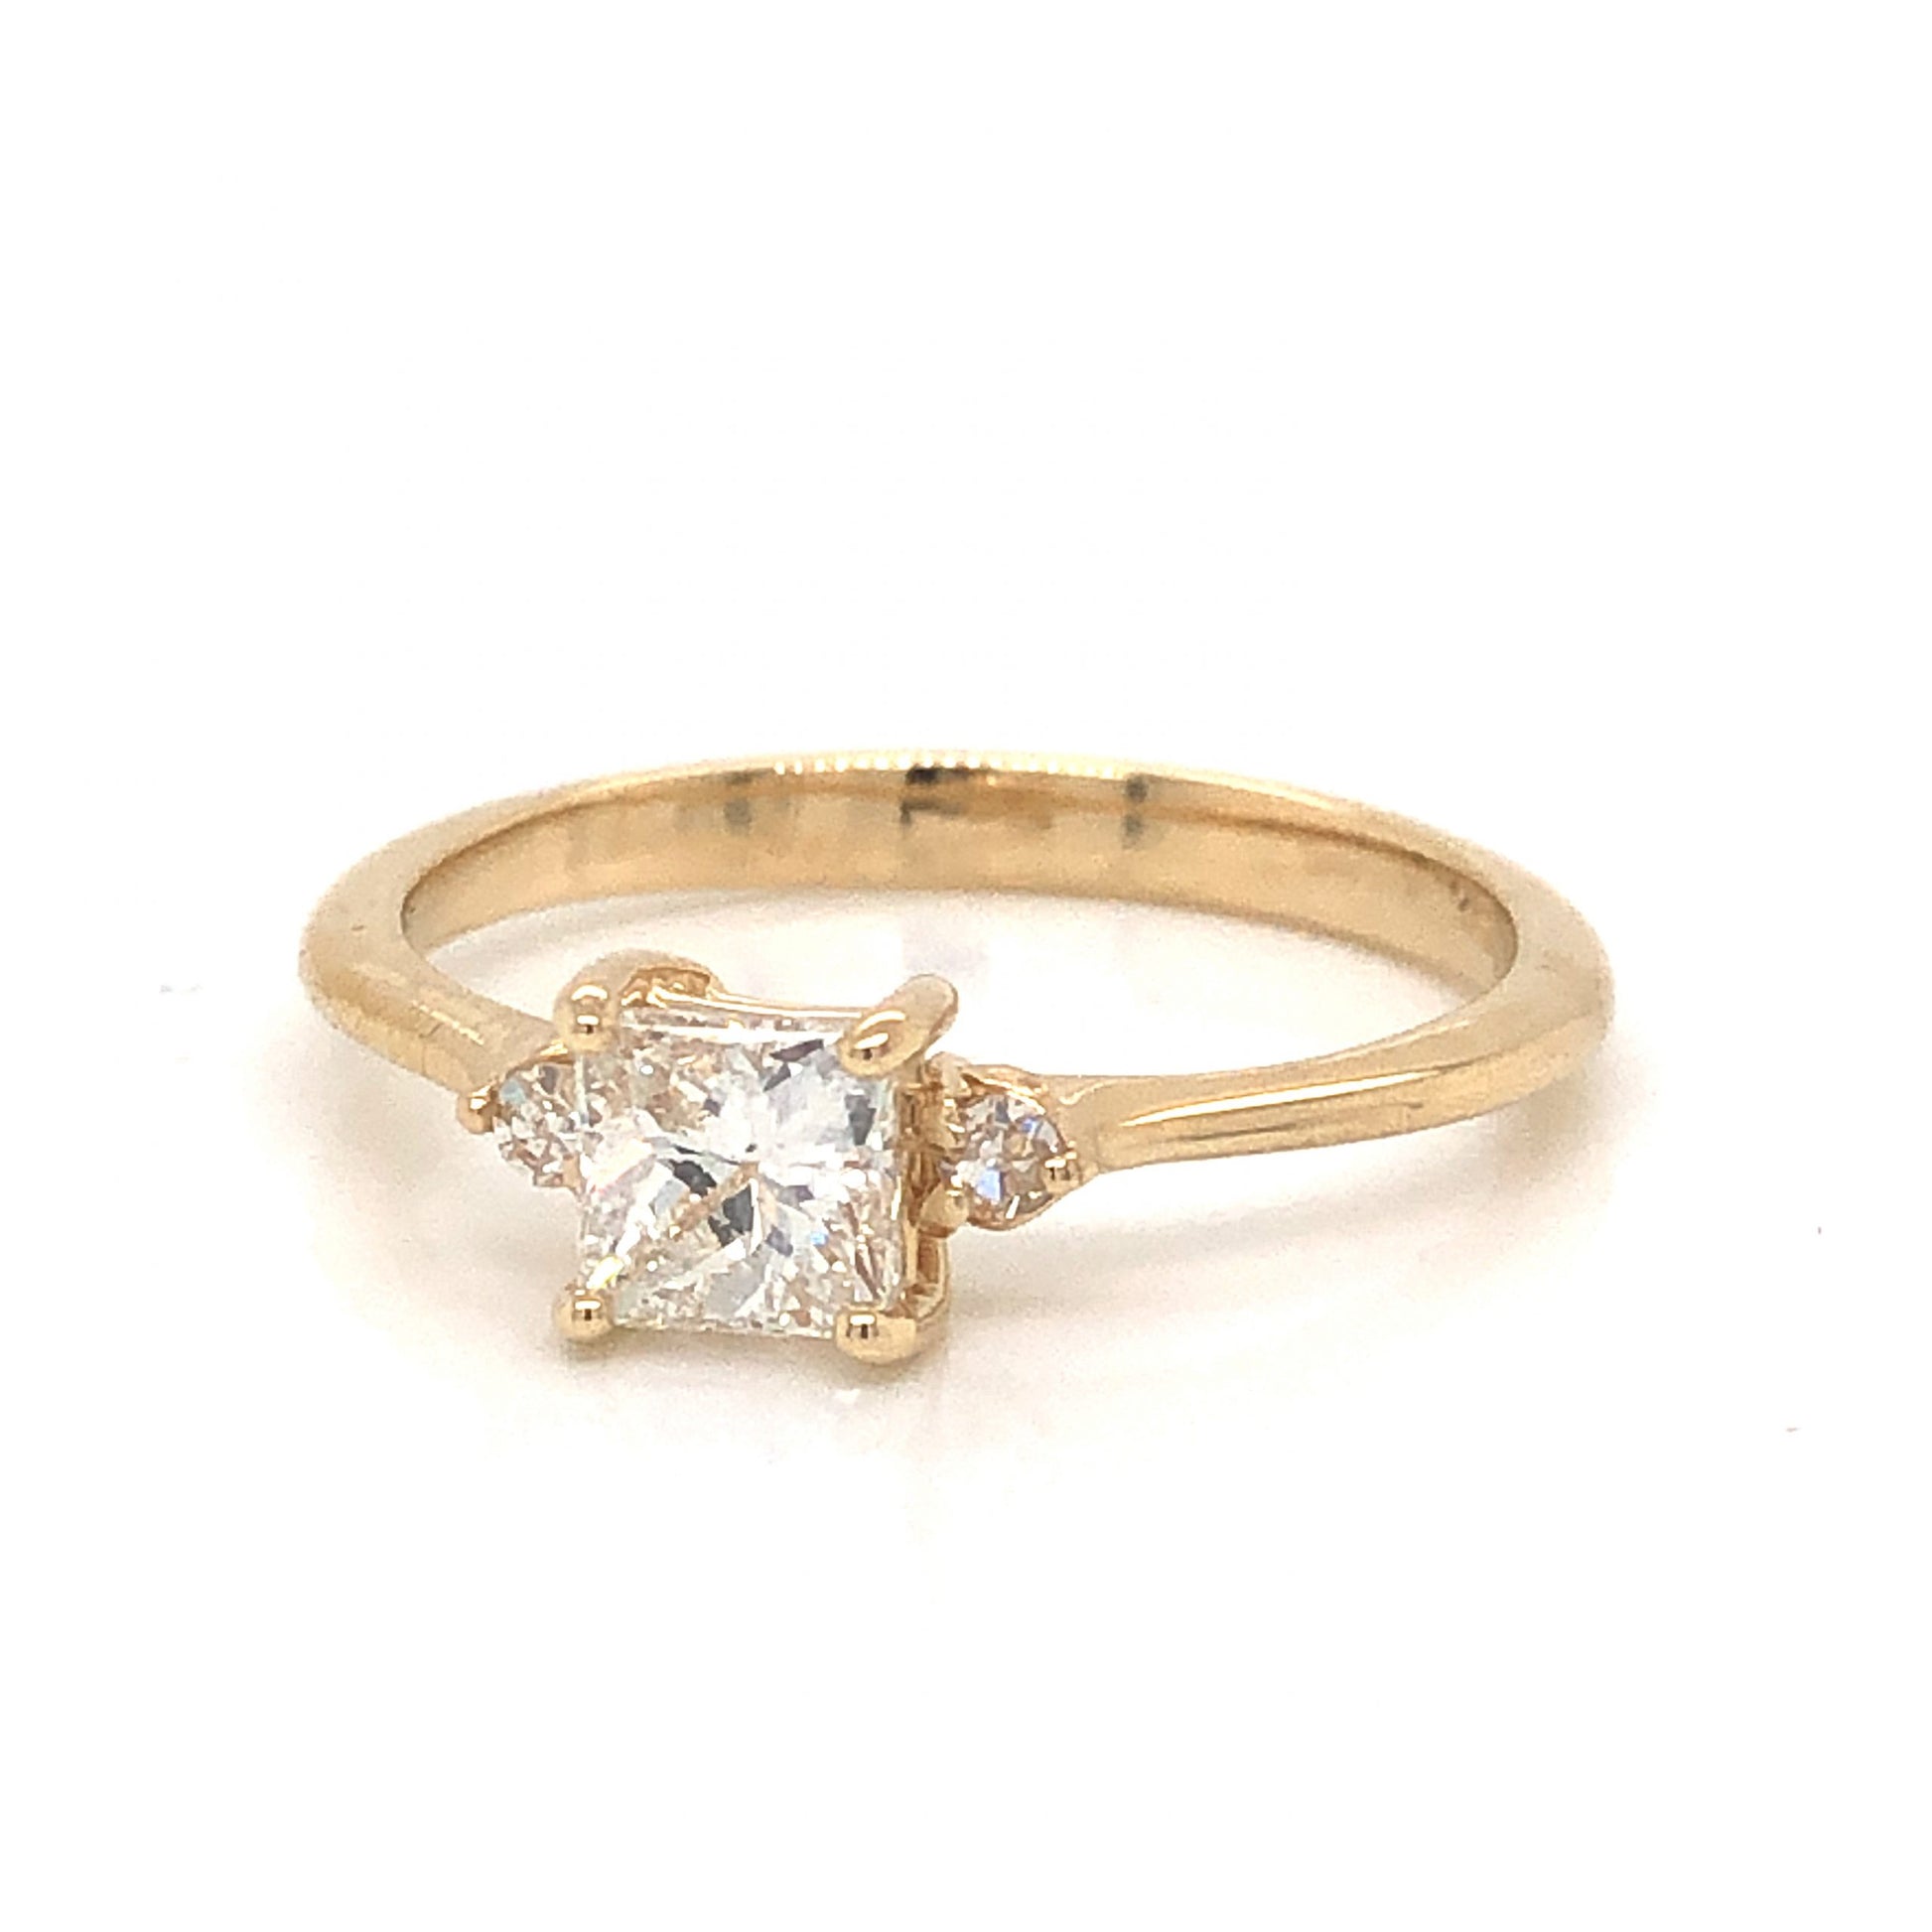 .58 Princess Cut Diamond Engagement Ring in 14K Yellow GoldComposition: 14 Karat Yellow Gold Ring Size: 7 Total Diamond Weight: .64ct Total Gram Weight: 2.2 g Inscription: 14k 
      